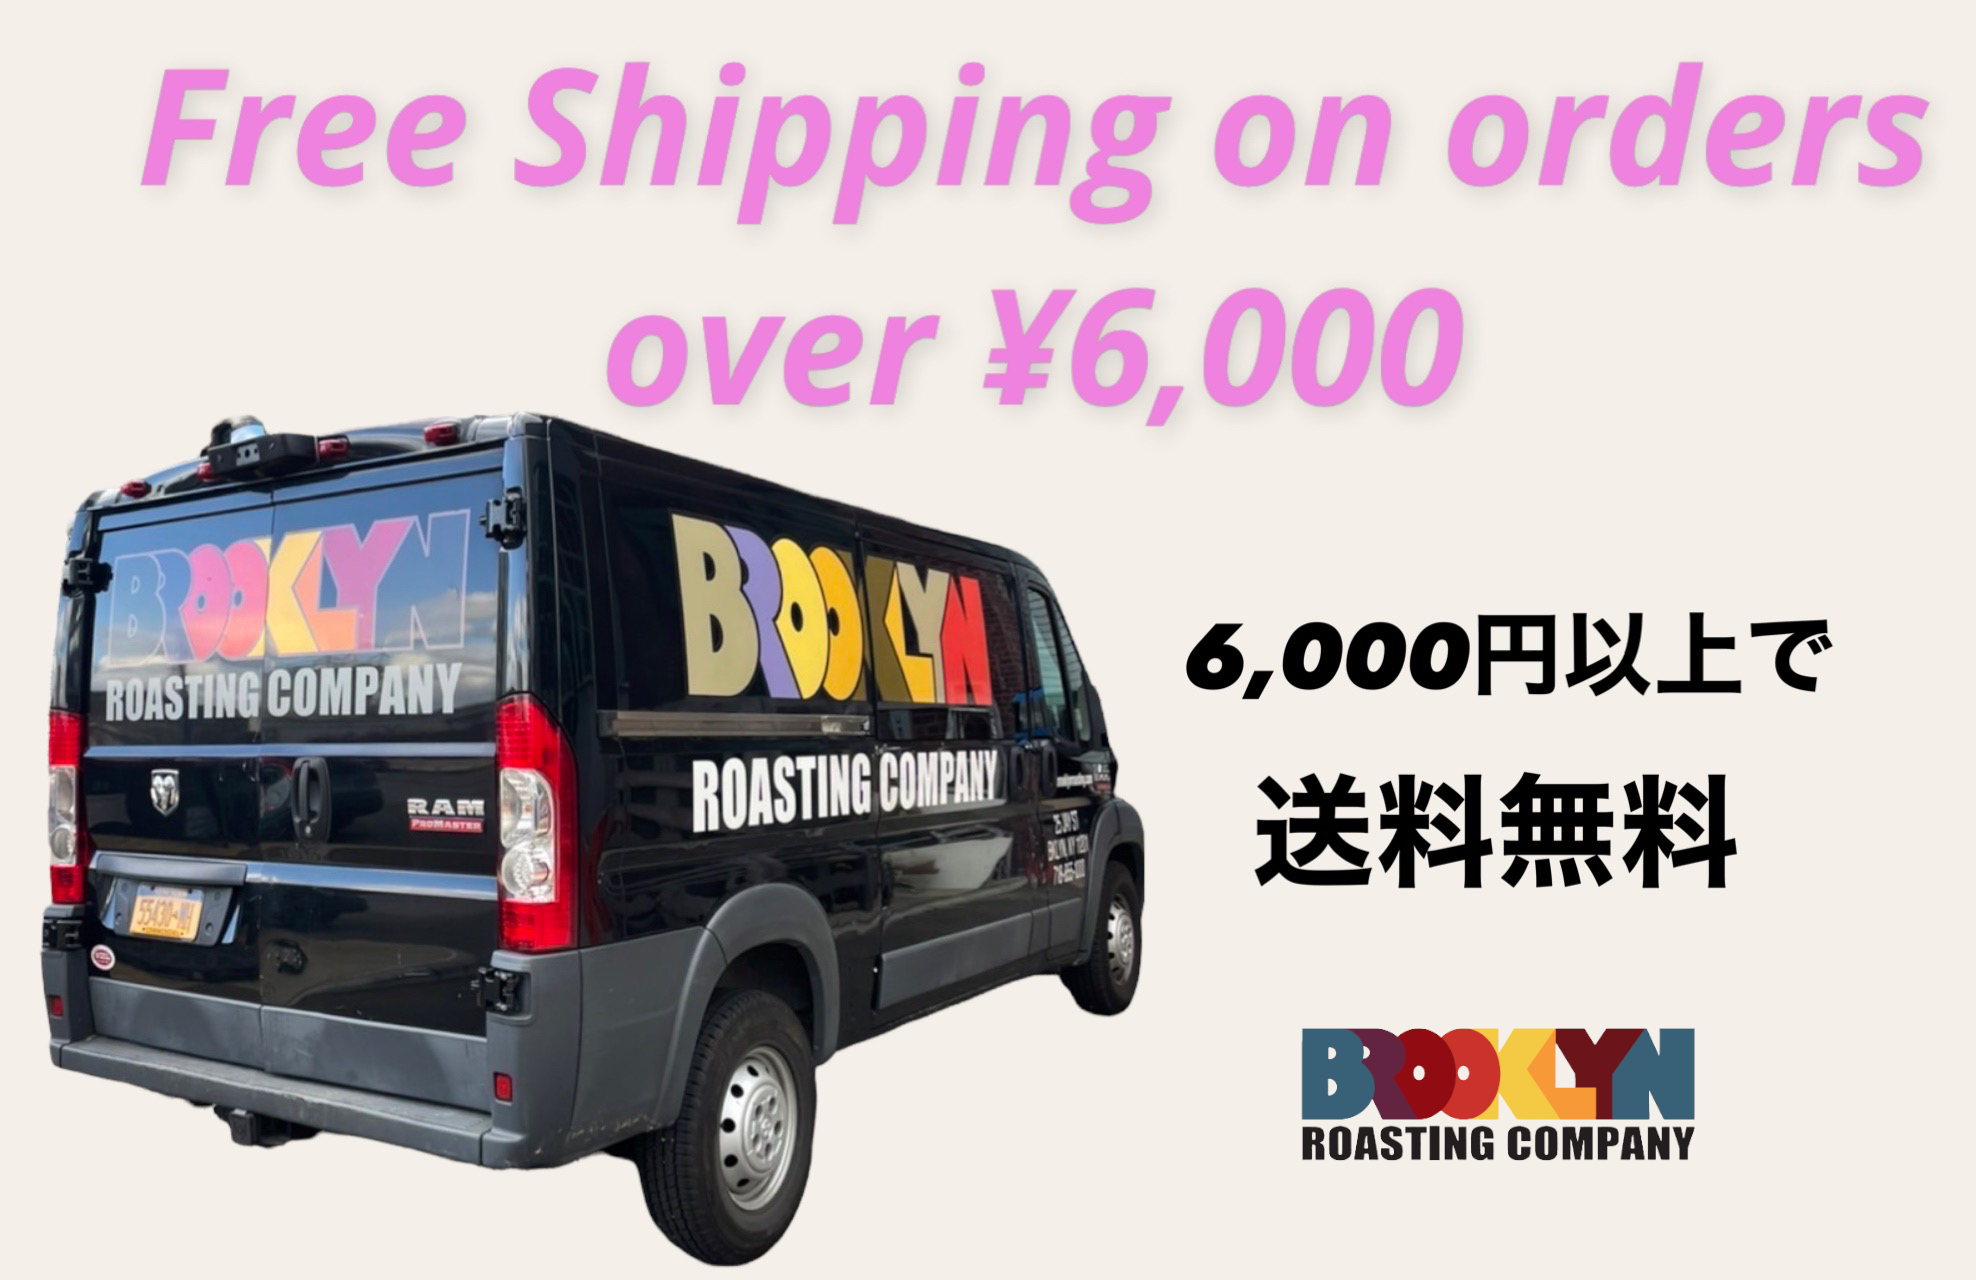 Free Shipping on orders over ¥6,000